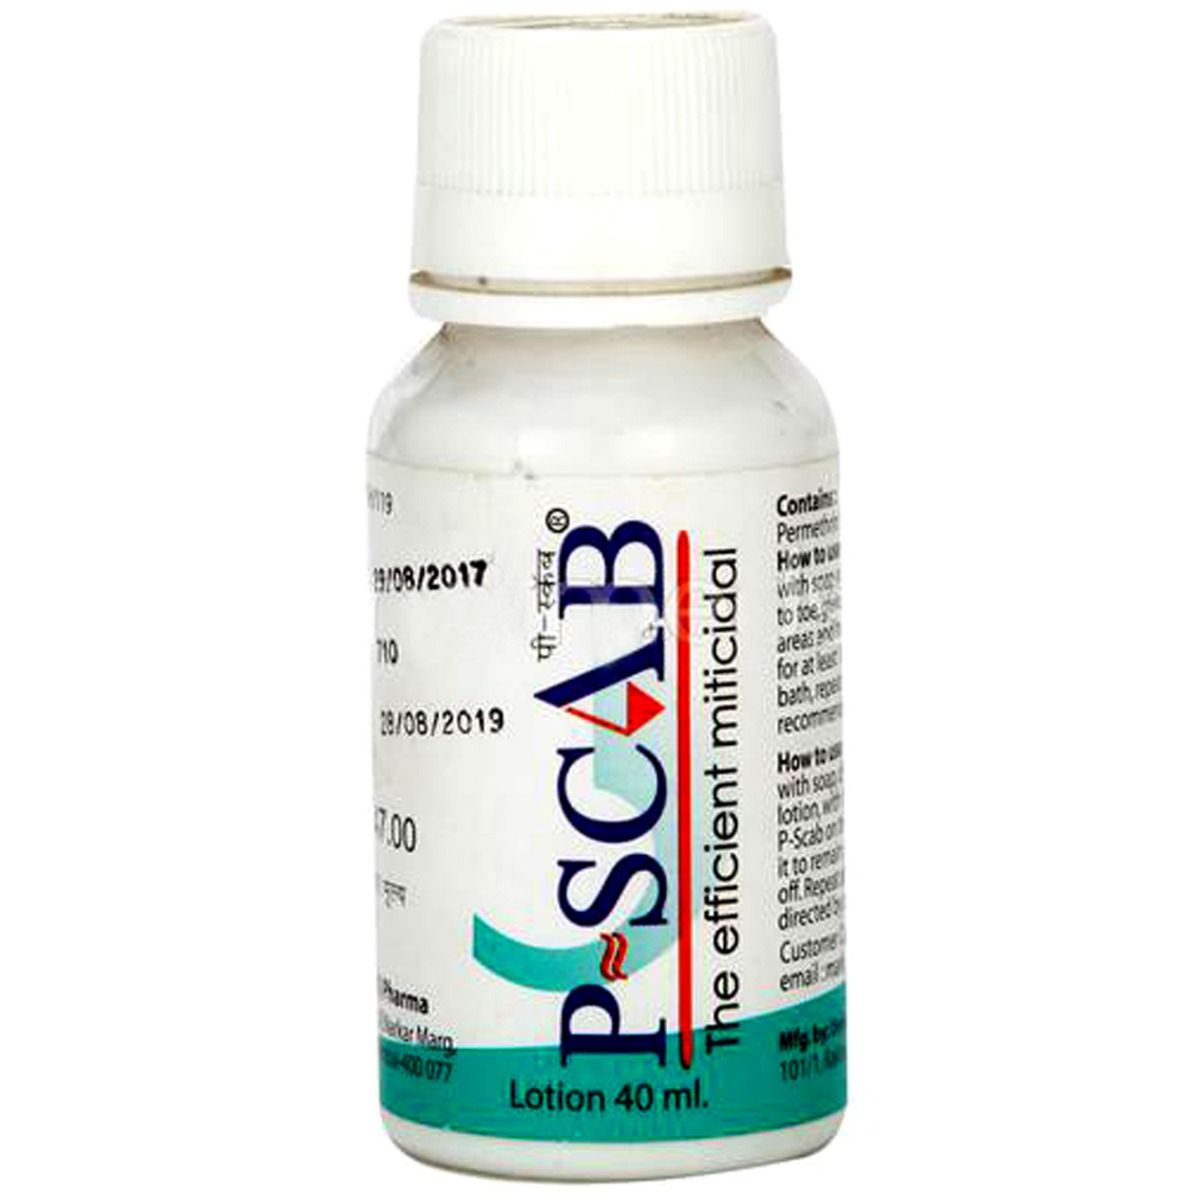 P-Scab Lotion 40 ml Price, Uses, Side Effects, Composition ...